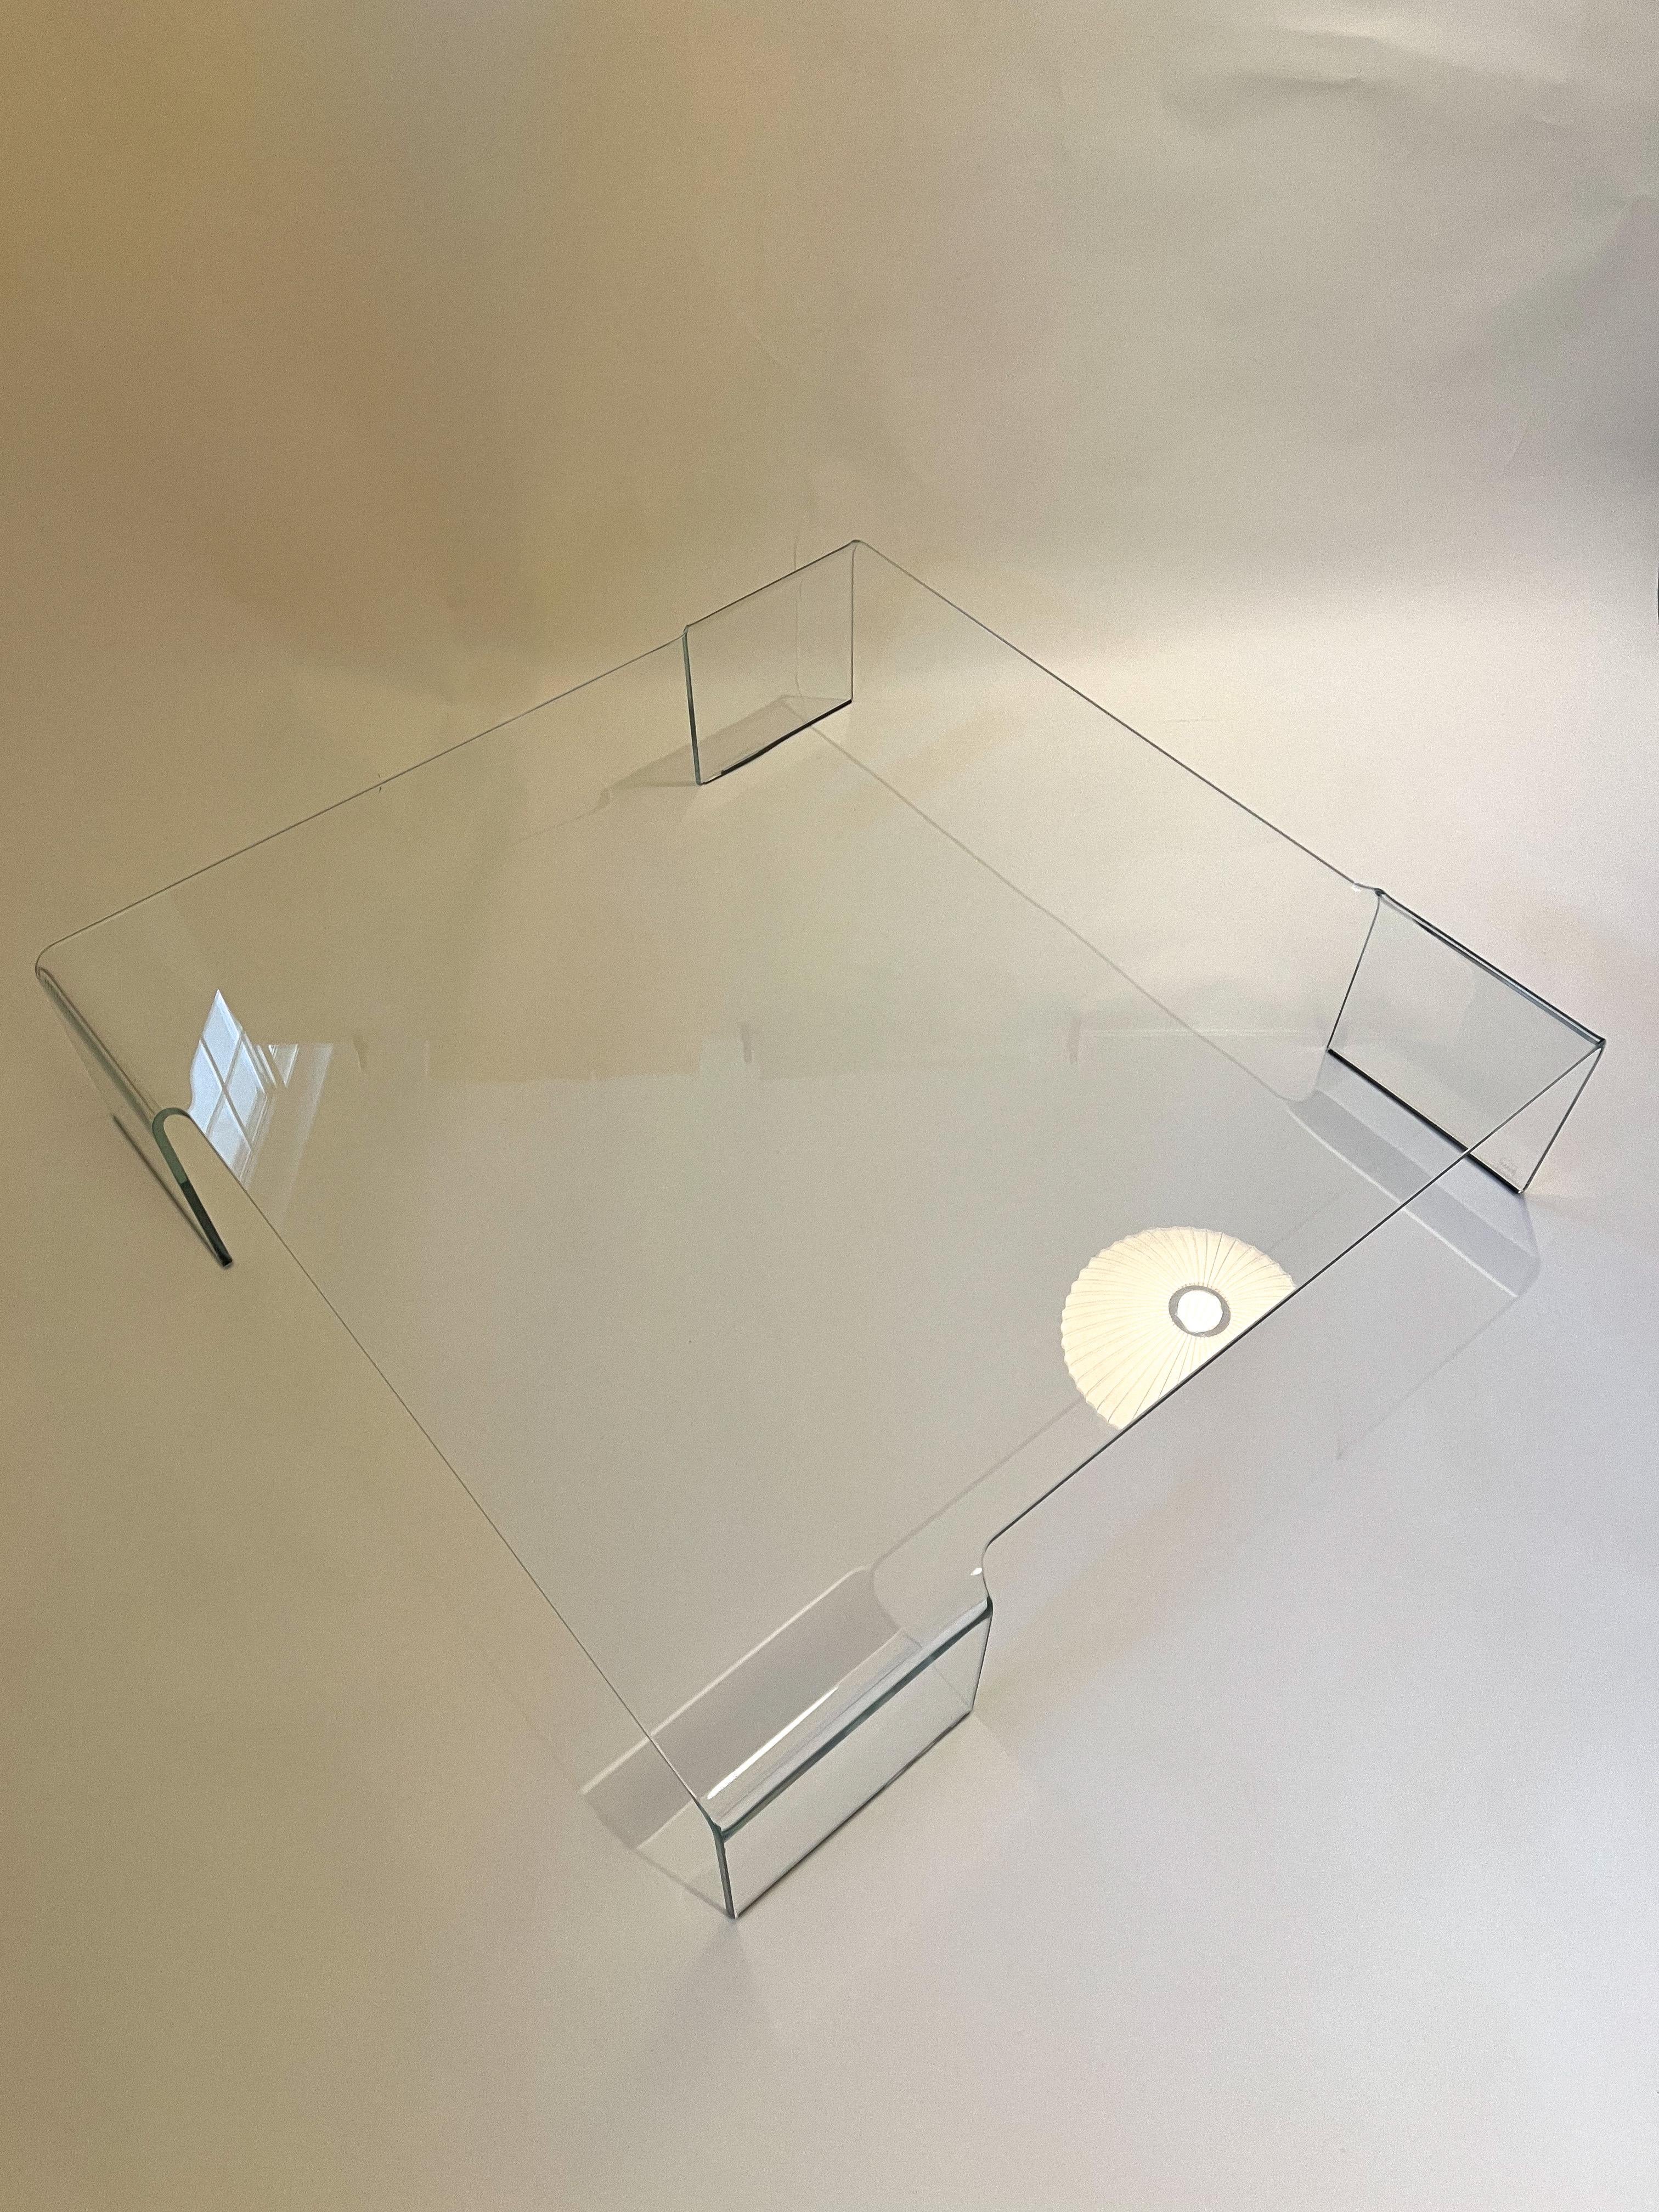 Authentic vintage monolithic coffee table made of a 1/2-inch thick continuous piece of glass that’s curves at the legs for a “waterfall” effect. Incredible statement piece. Designed by Rodolfo Dordoni for FIAM Italia.